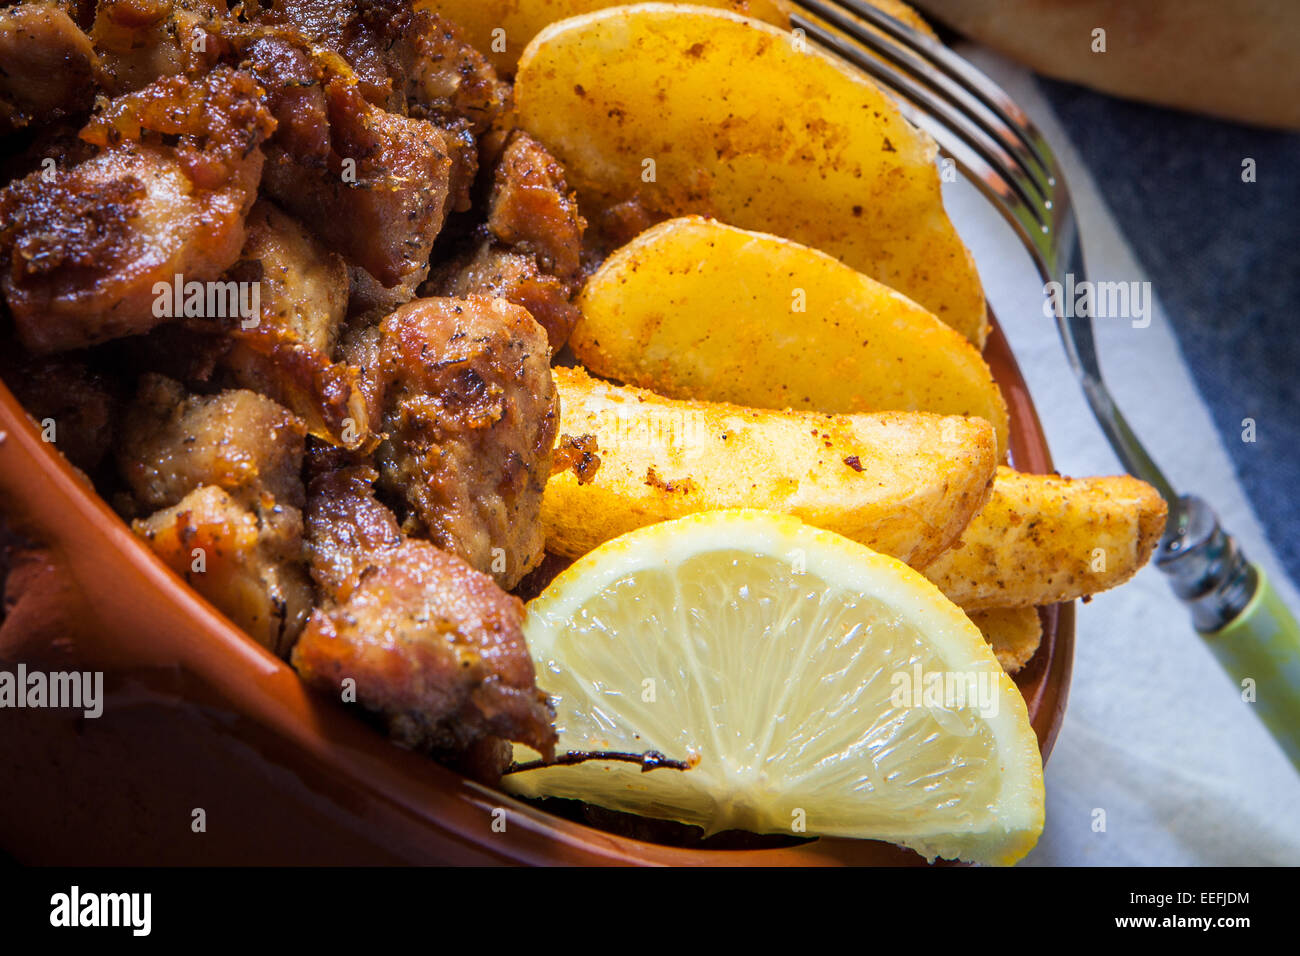 deep fried pork meat with fries and lemon served in clay pot Stock Photo